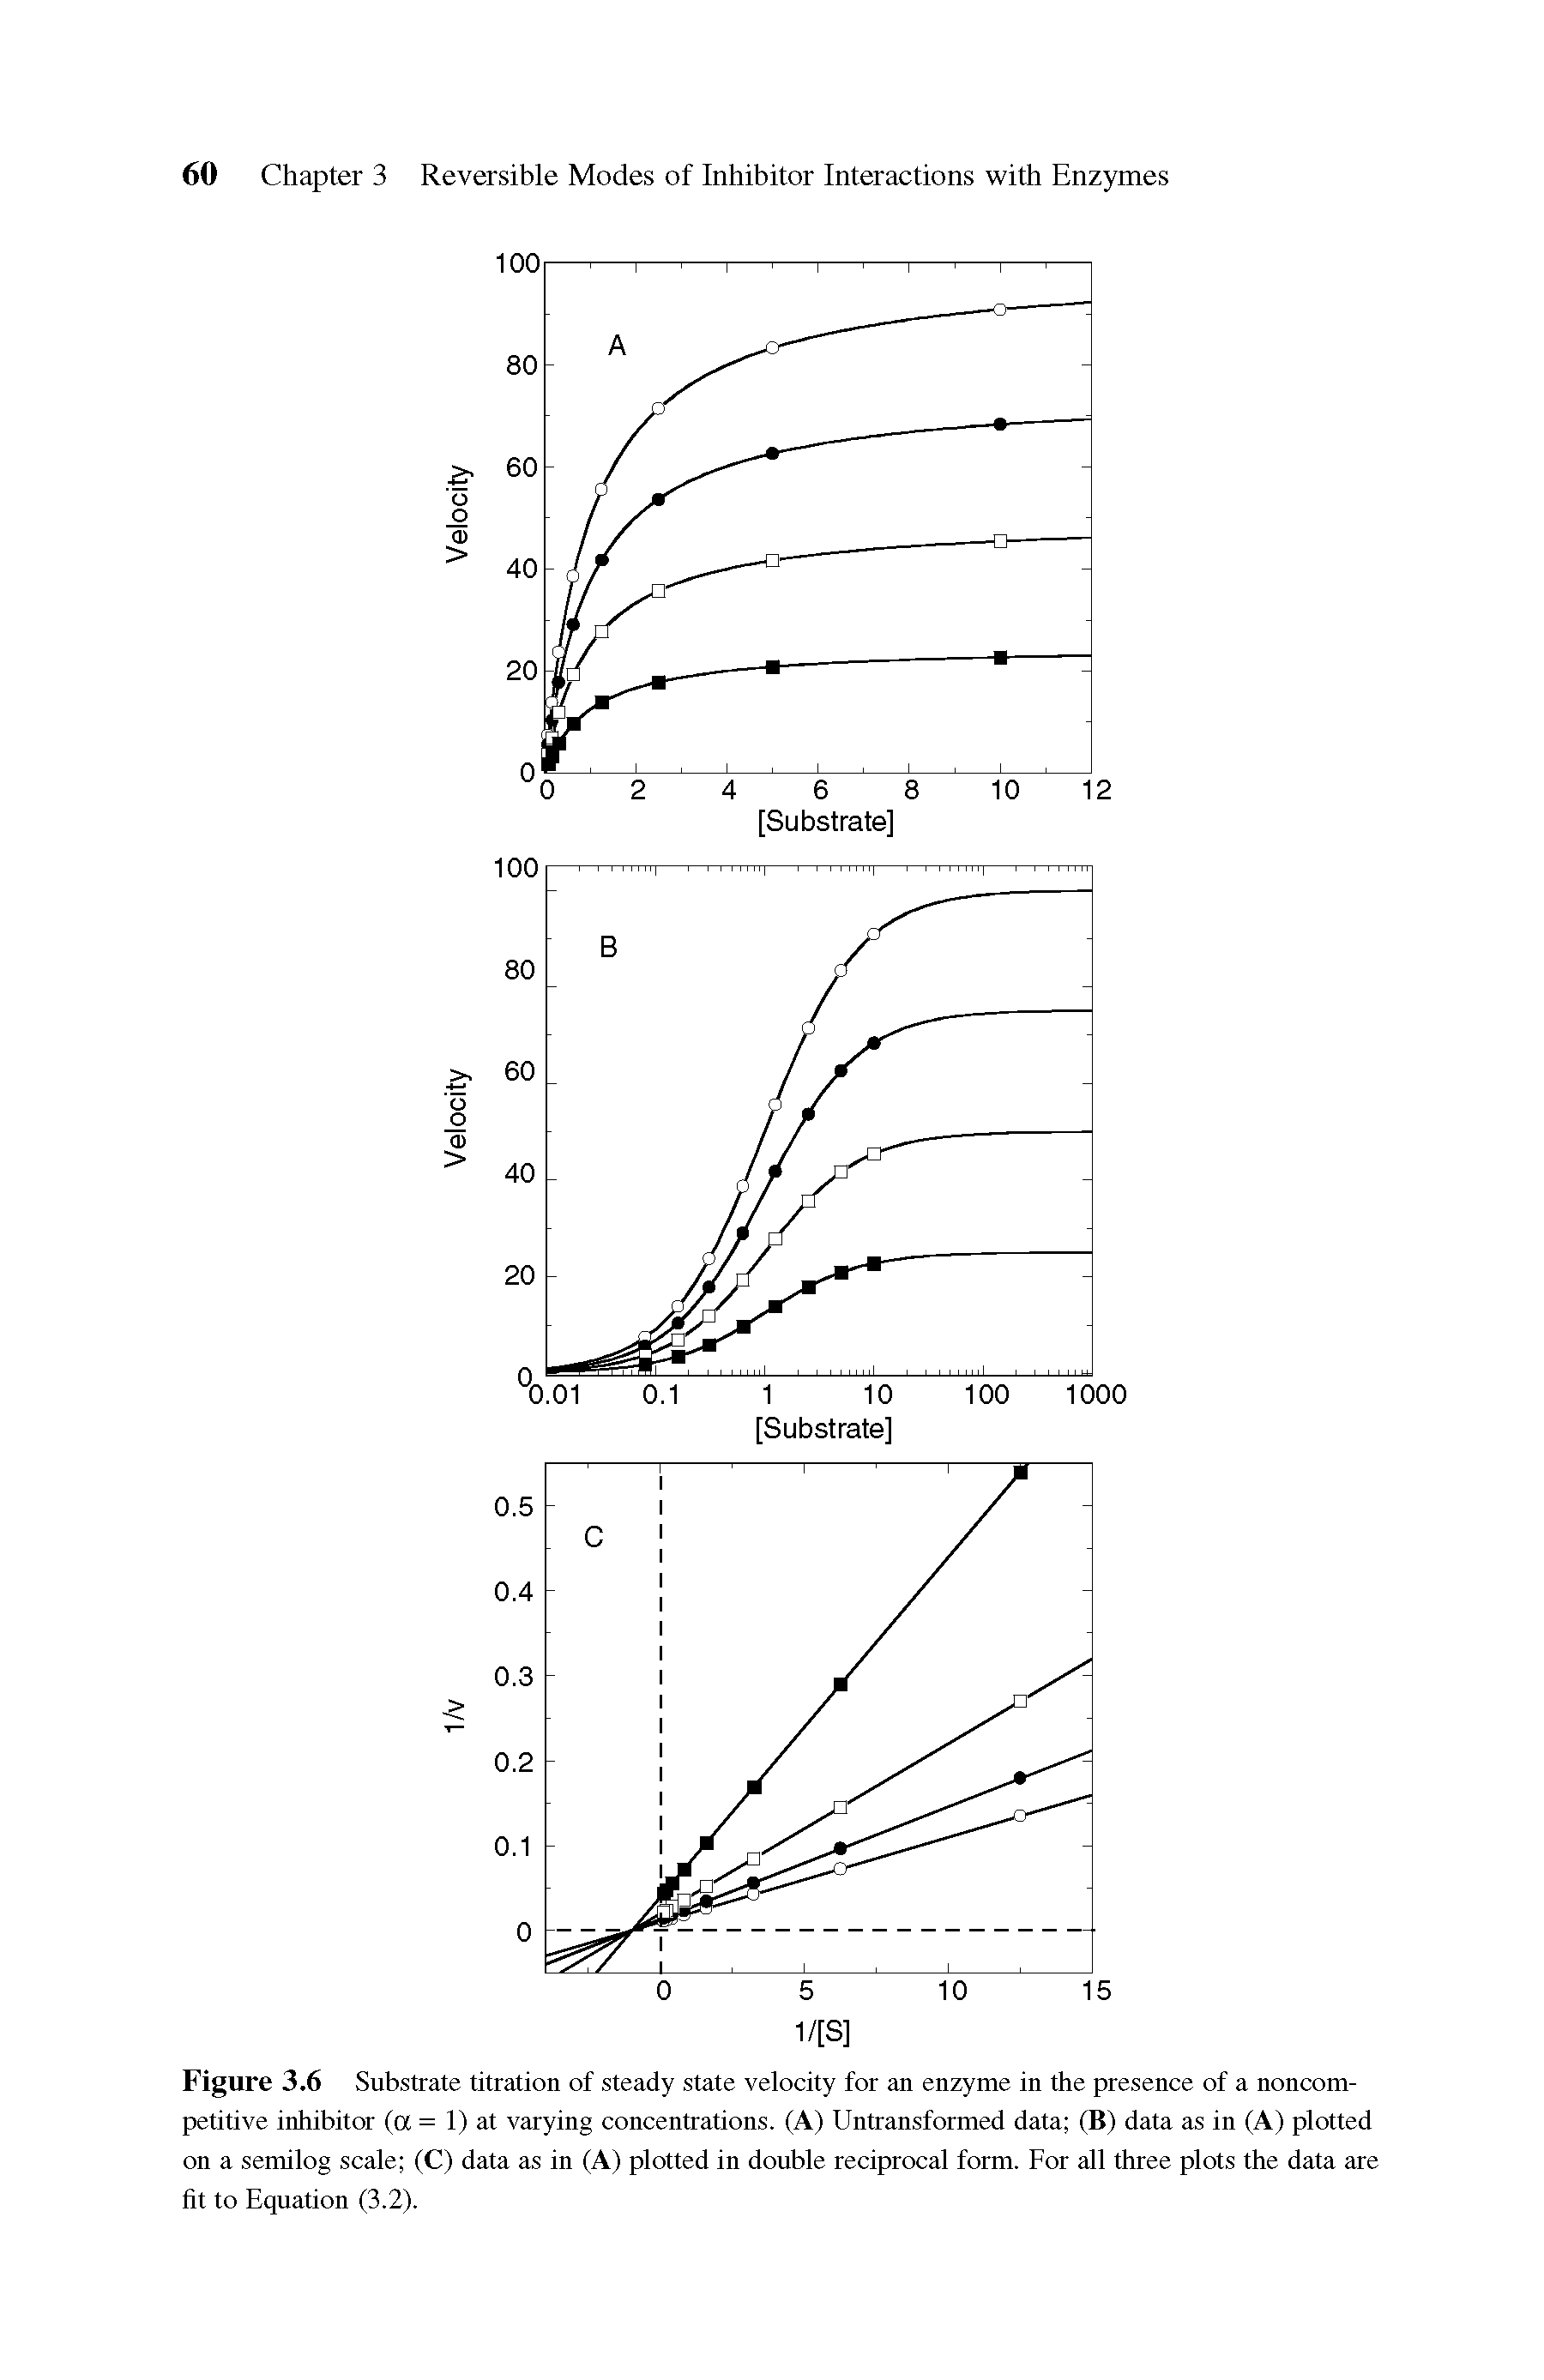 Figure 3.6 Substrate titration of steady state velocity for an enzyme in the presence of a noncompetitive inhibitor (a = 1) at varying concentrations. (A) Untransformed data (B) data as in (A) plotted on a semilog scale (C) data as in (A) plotted in double reciprocal form. For all three plots the data are fit to Equation (3.2).